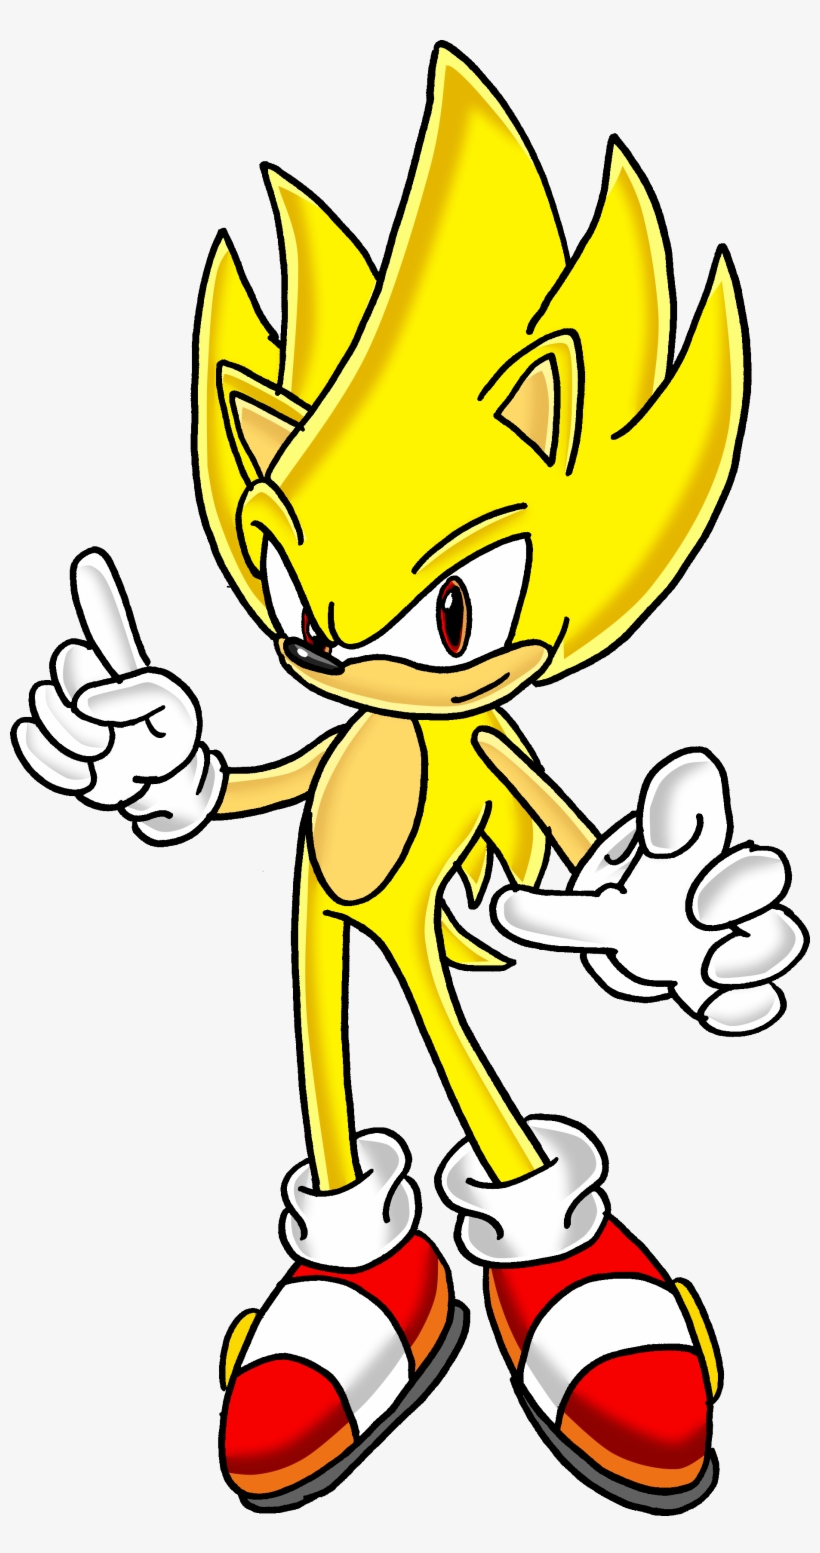 How To Draw Manic The Hedgehog From Sonic The Hedgehog Printable Step 9EC